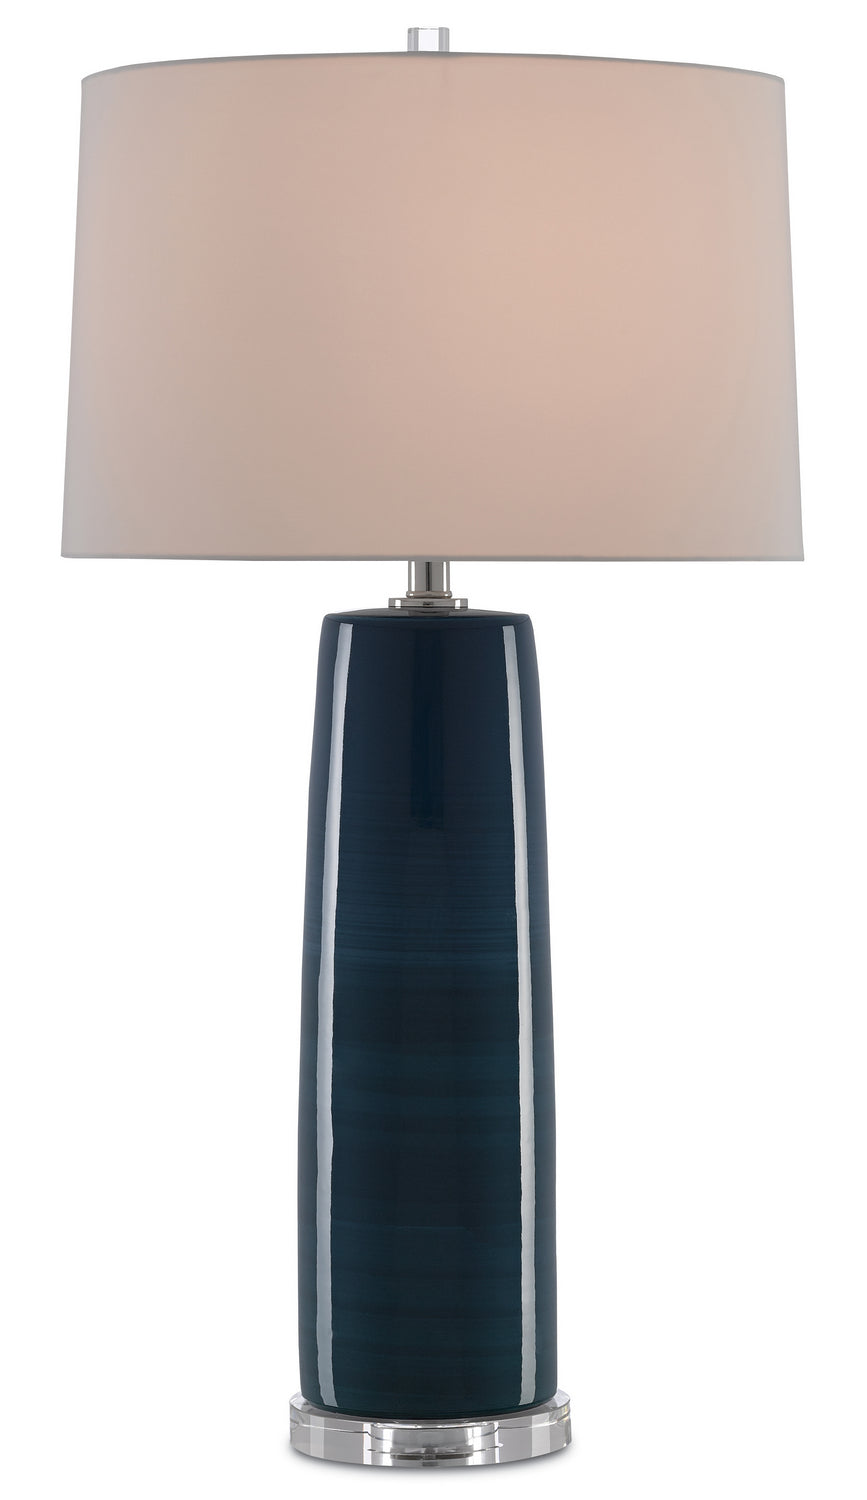 One Light Table Lamp from the Azure collection in Navy/Polished Nickel finish